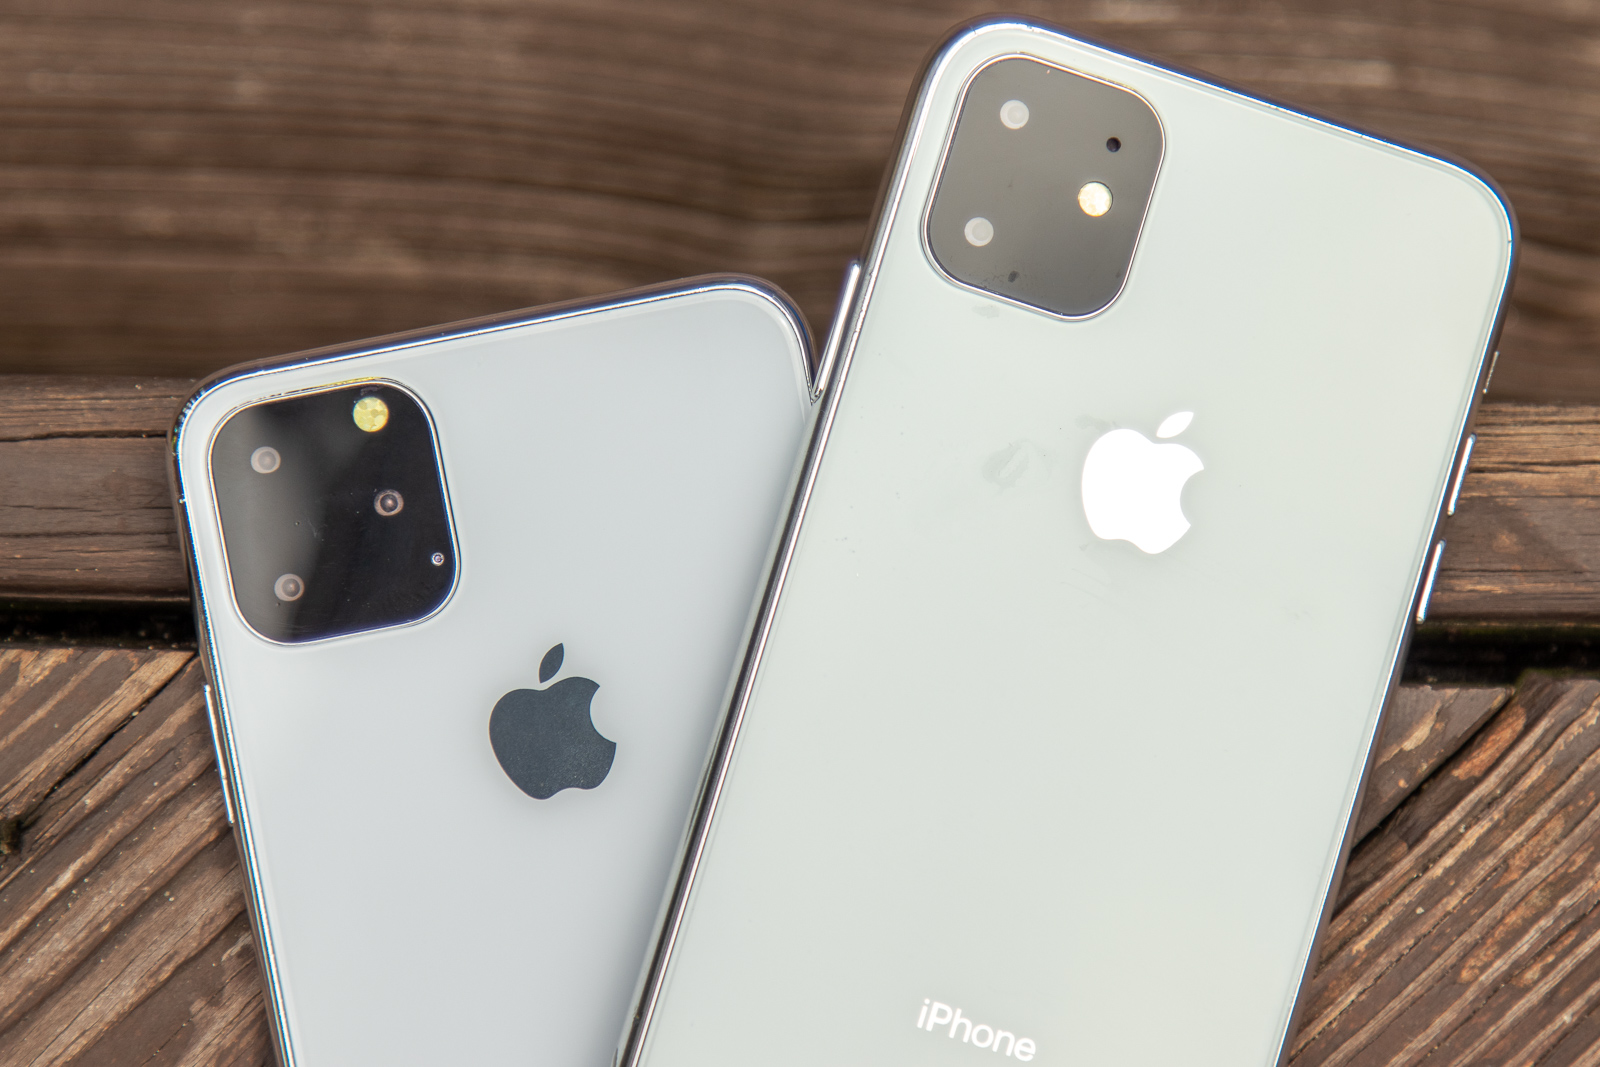 The iPhone XI probably won't cause a surge in sales.